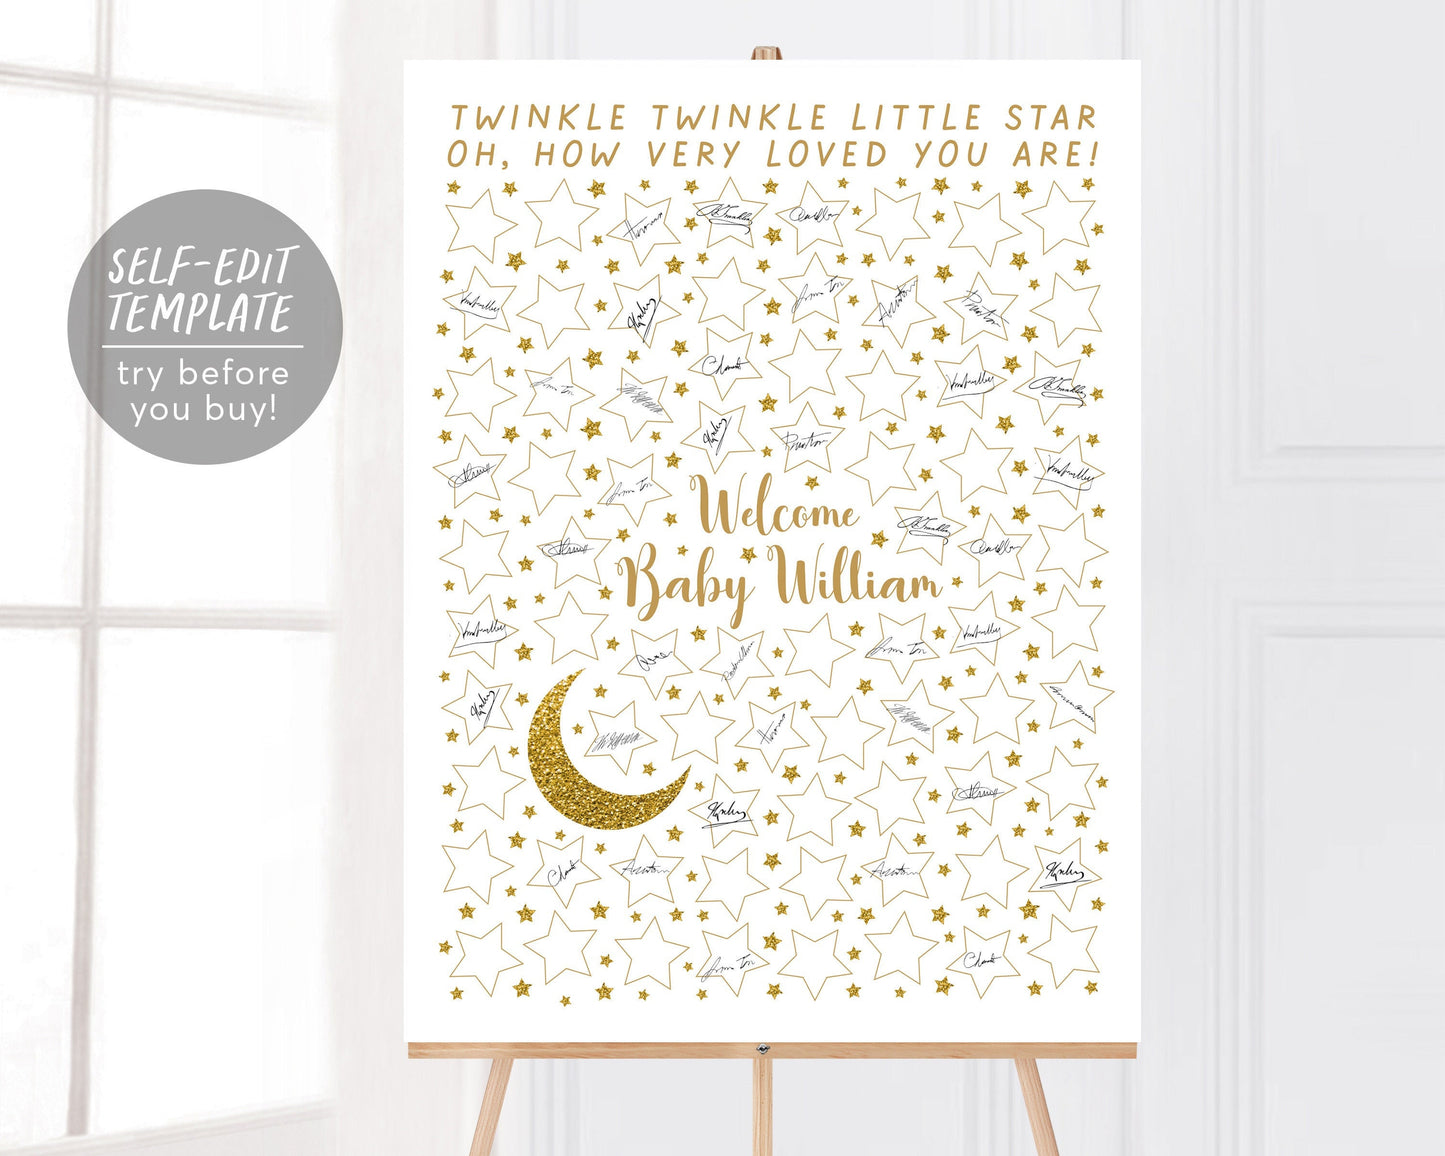 Editable Twinkle Twinkle Little Star Baby Shower Guest Book Alternative Template, Sign a Star, Moon Stars Gold Unisex Baby Guestbook Poster